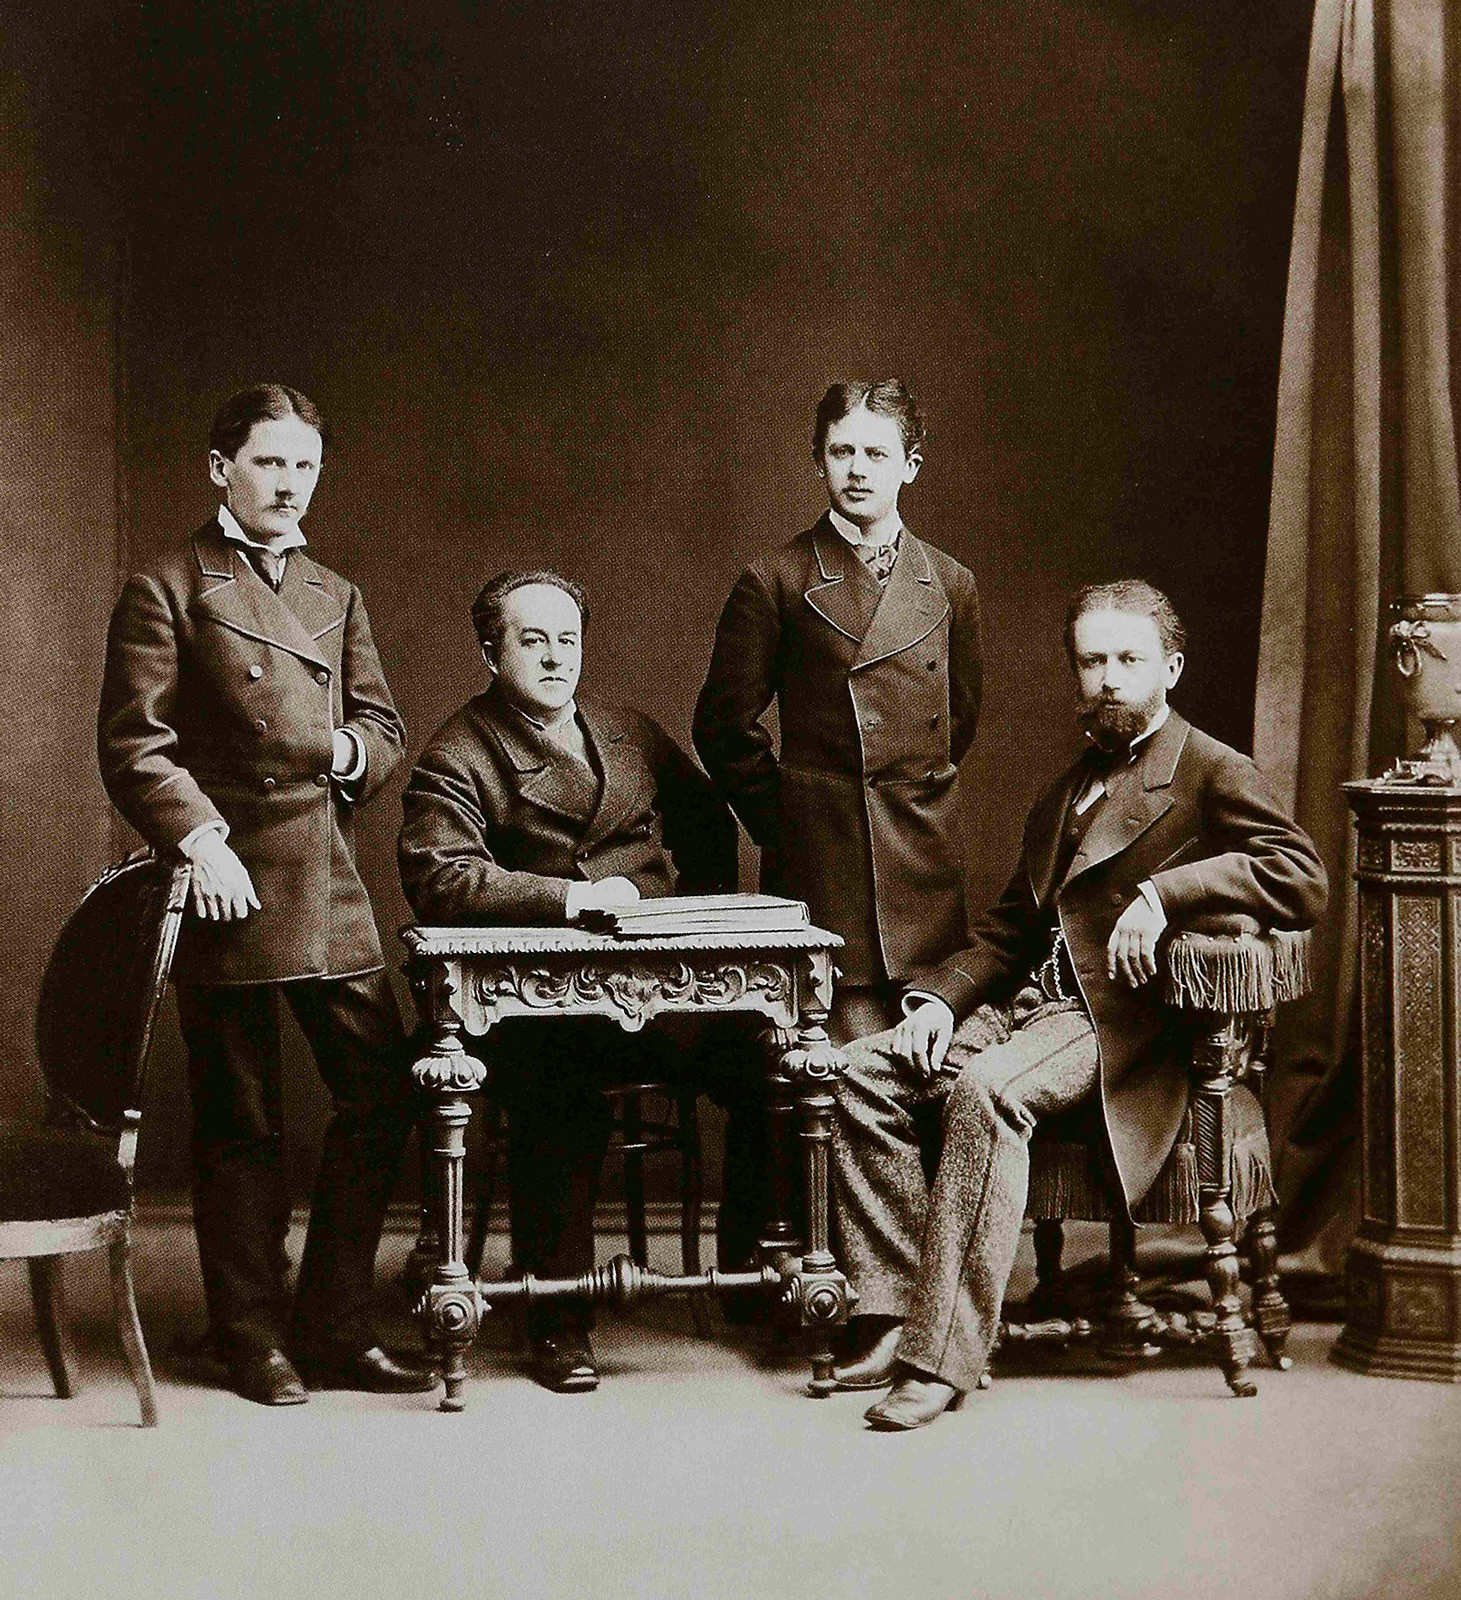 Pyotr Ilyich Tchaikovsky (right) with his brothers Modest and Anatoly and N.D. Kondratyev, 1875.